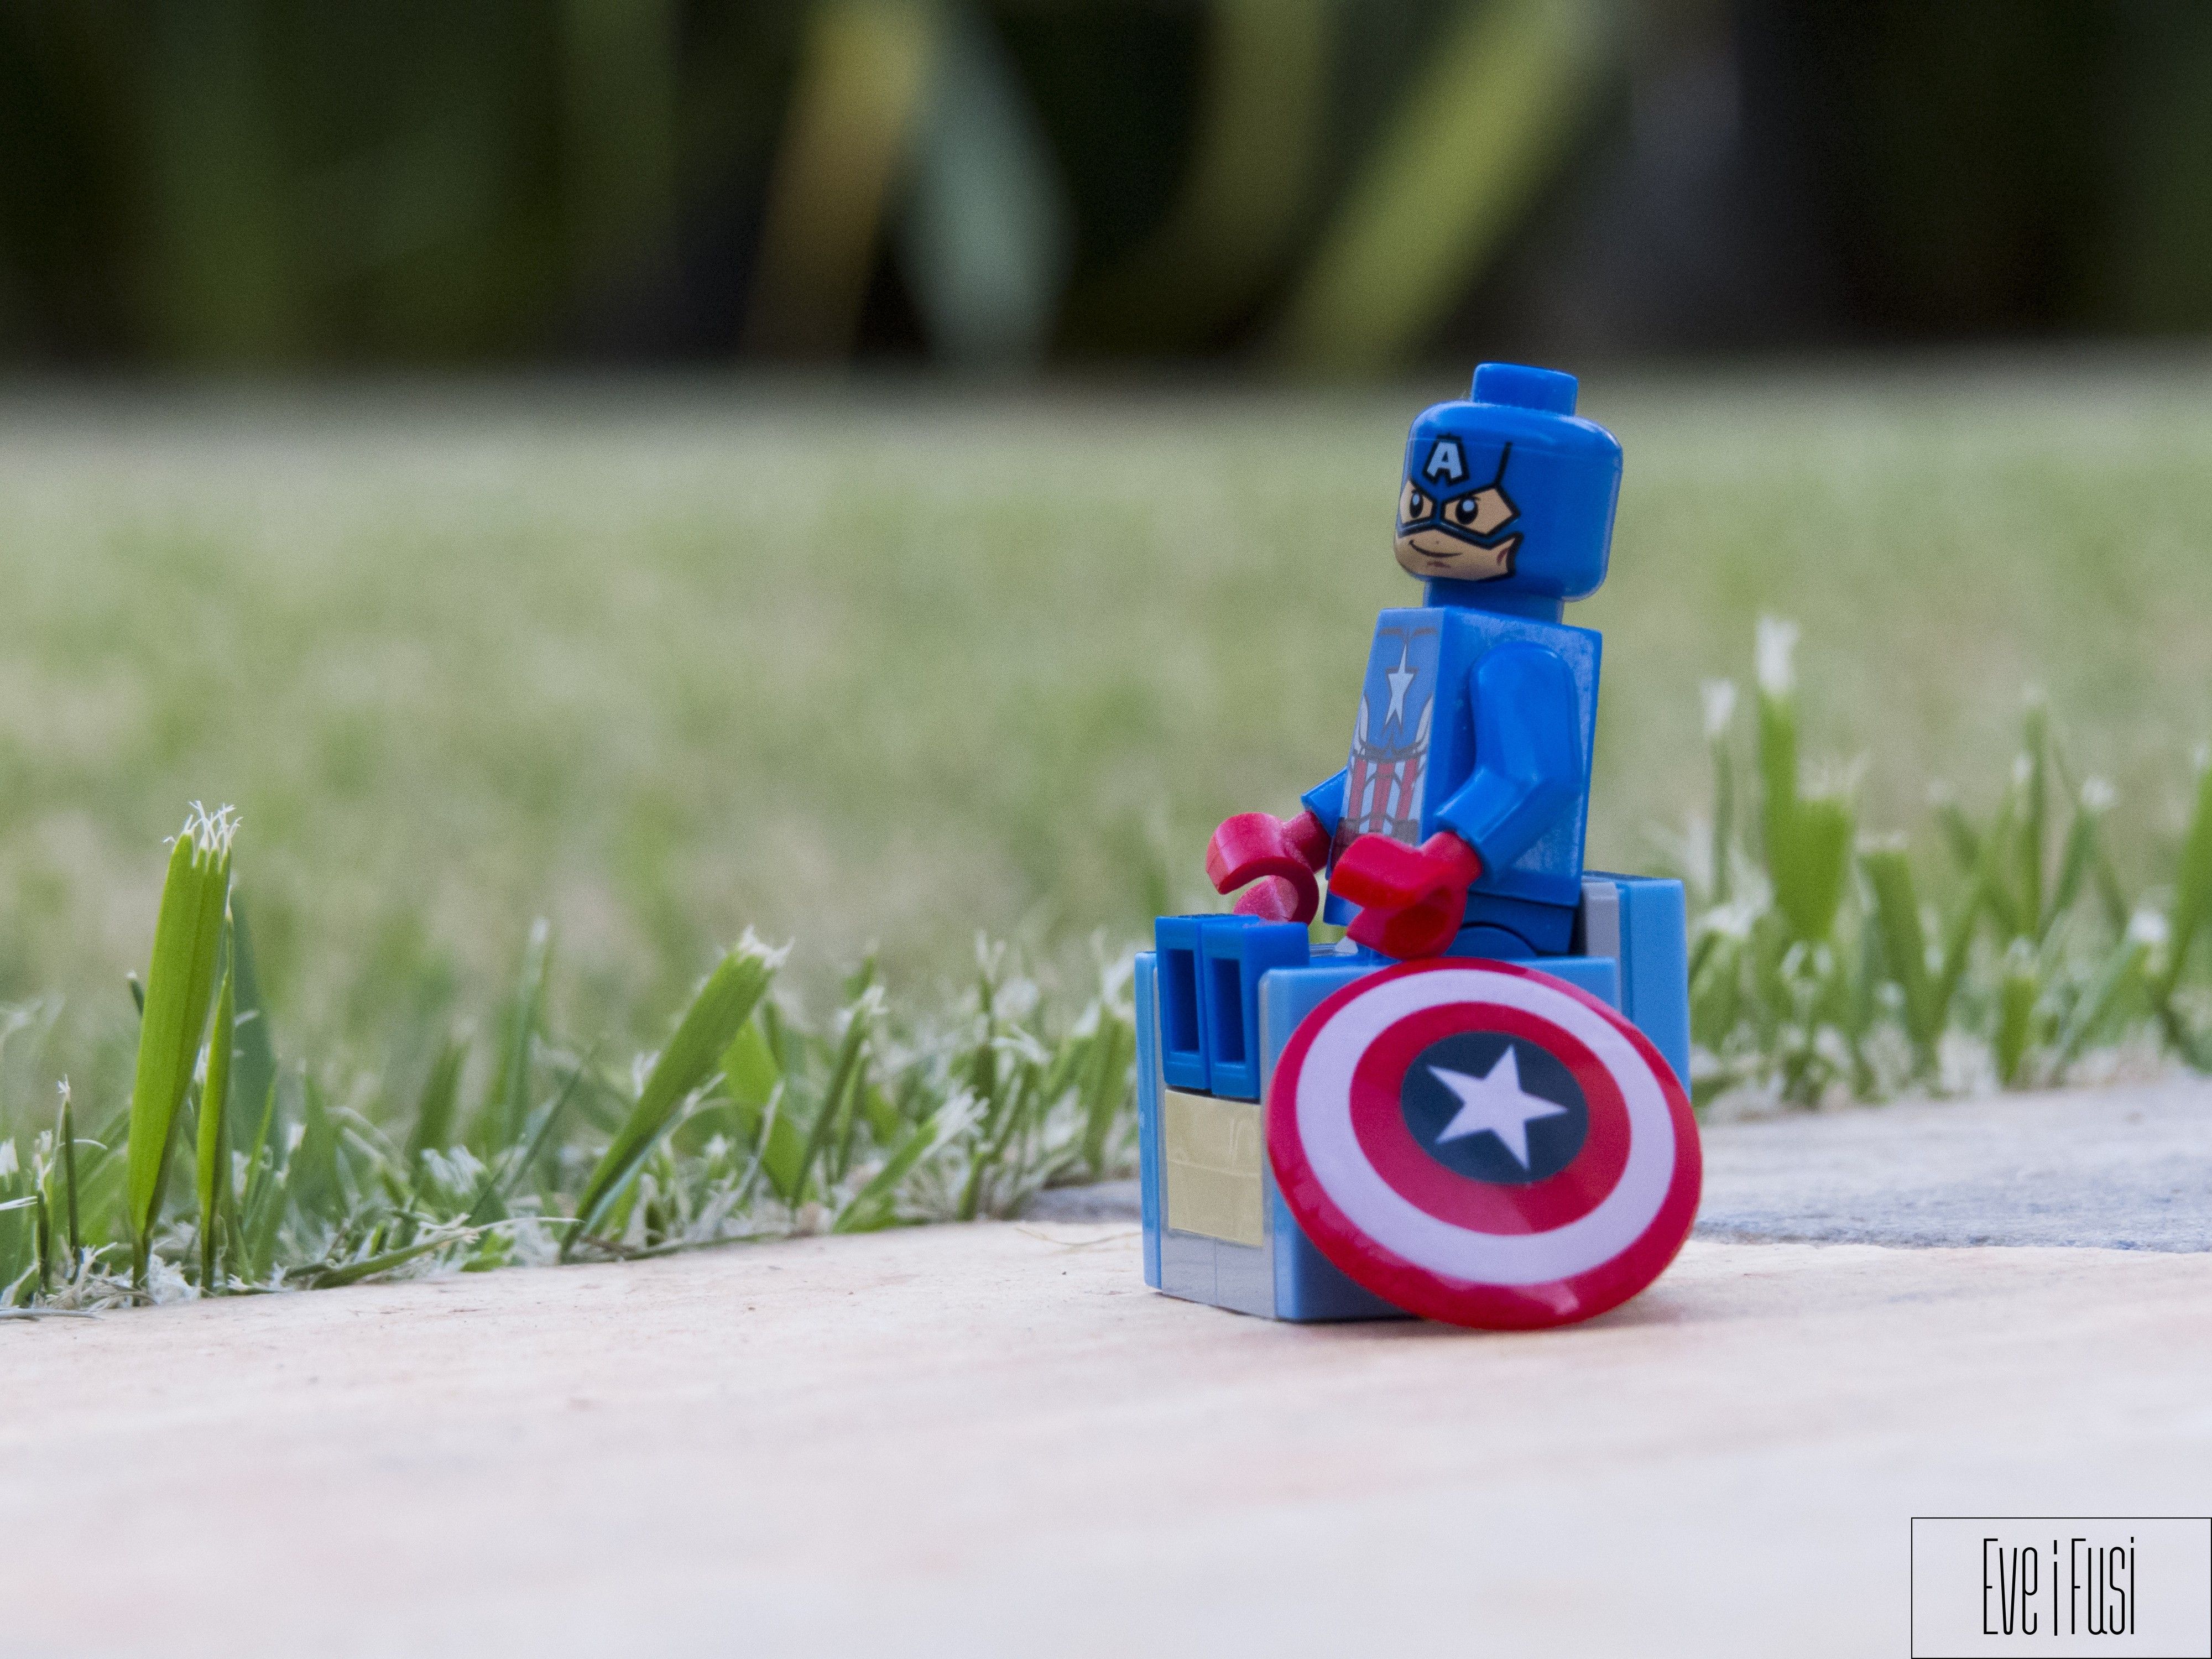 Captain America Lego, HD Movies, 4k Wallpaper, Image, Background, Photo and Picture